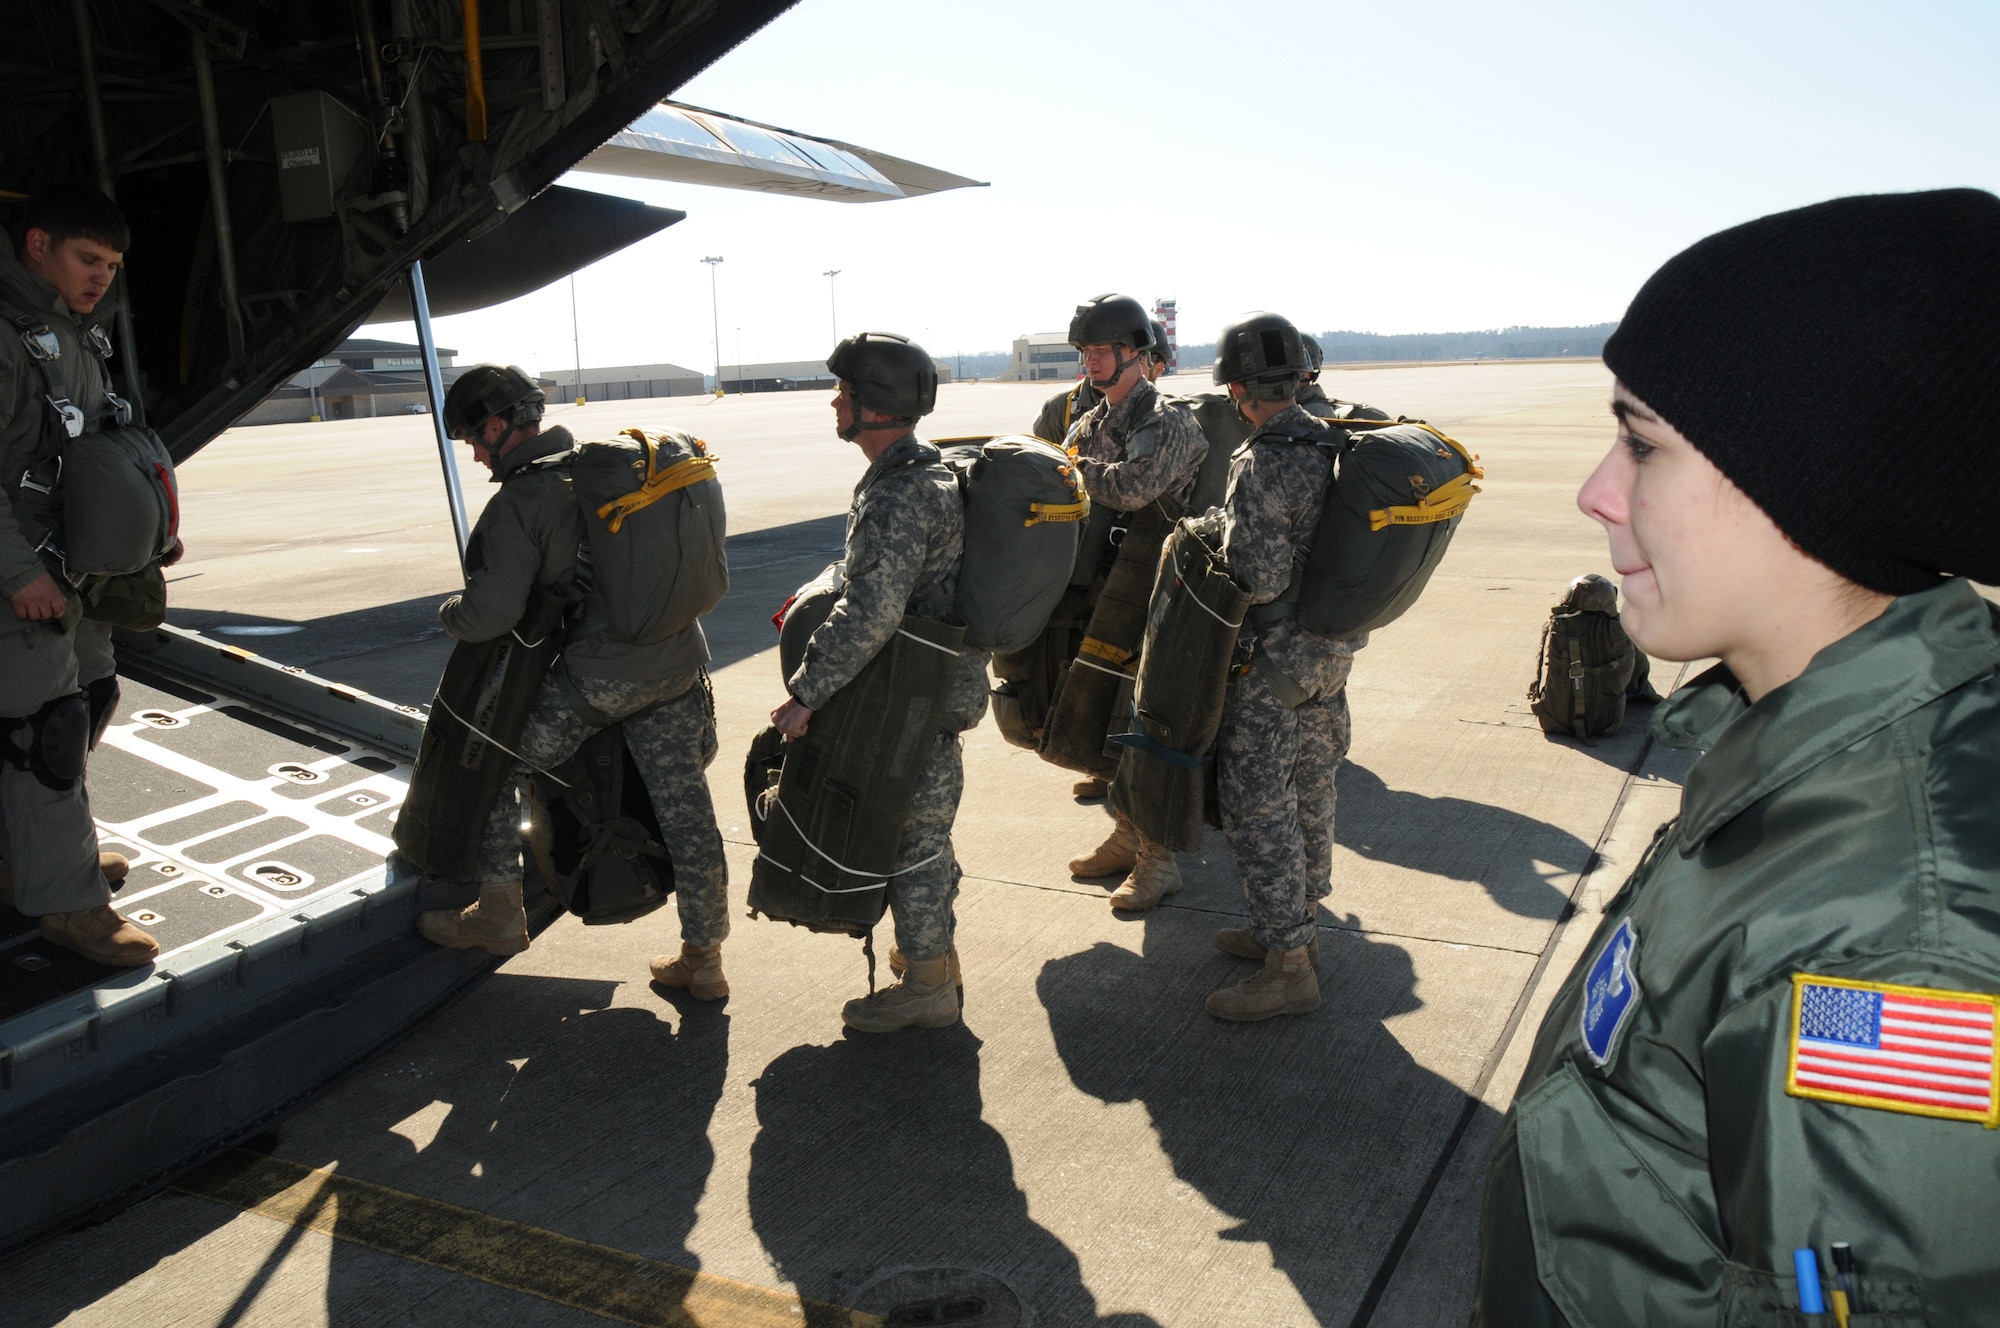 Load Master Senior Airman Laura Kruse observes the Army Rangers loading on the C-130. For the 107th Airlift Wing's first Army Ranger jump training operation. (AF Photo/Senior Master Sgt. Ray Lloyd)